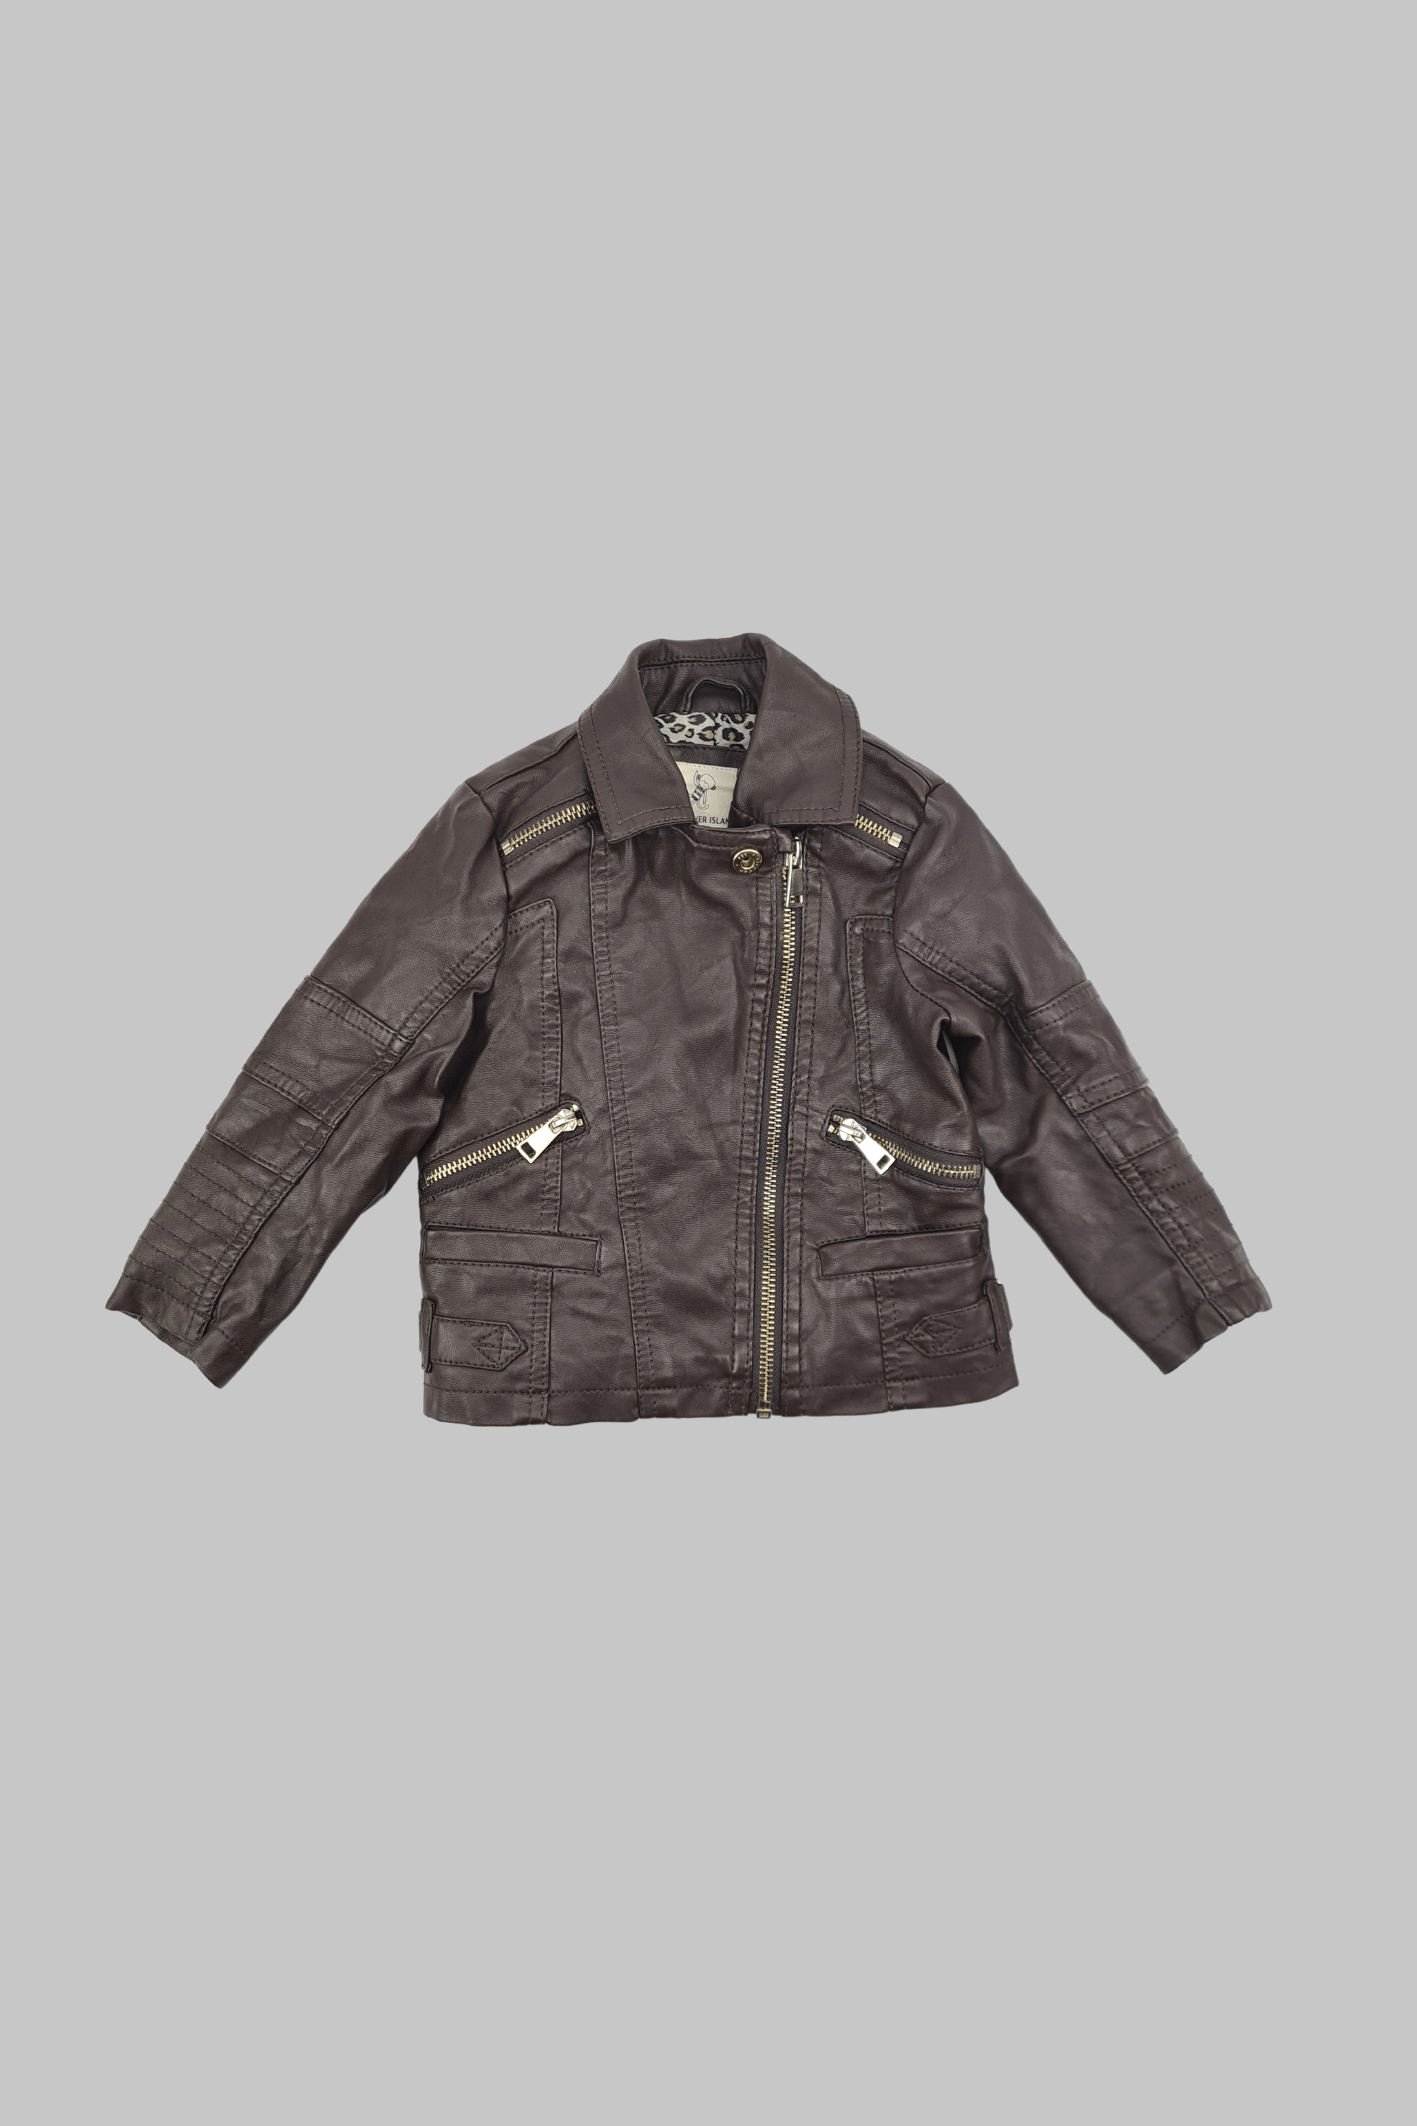 12-18m - Brown Faux Leather Jacket (River Island)